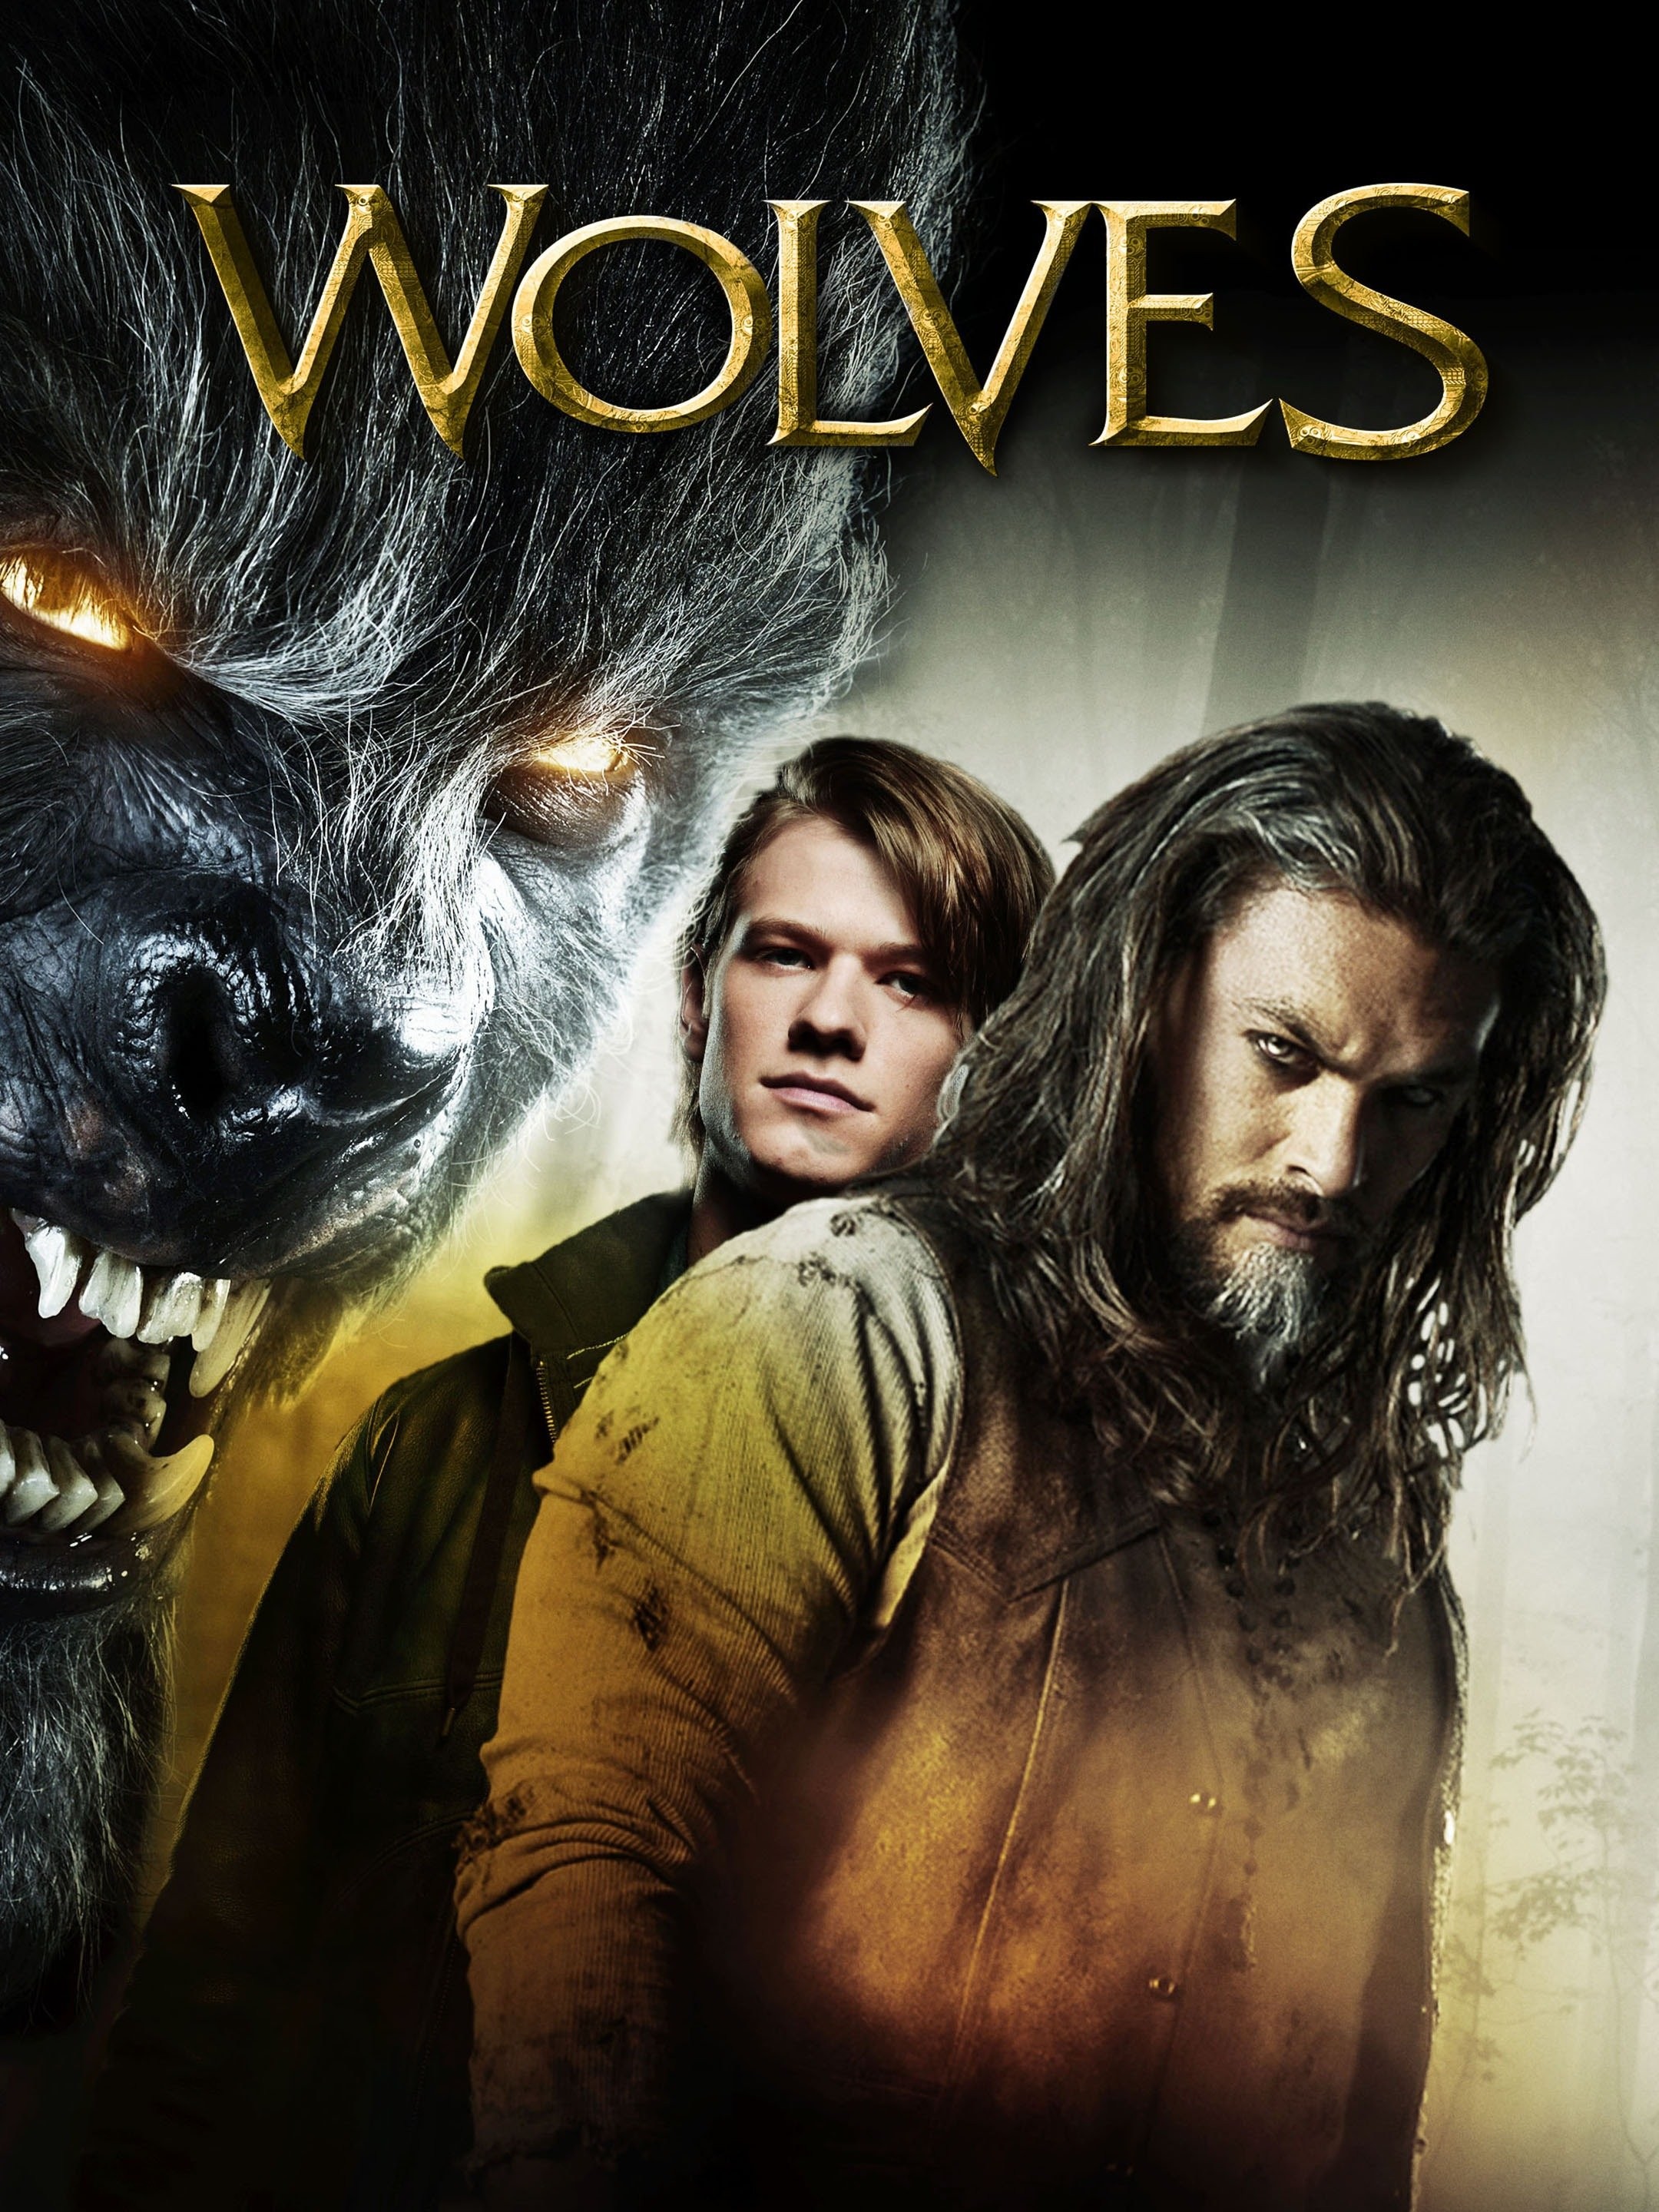 Wolves (2014 film) - Wikipedia